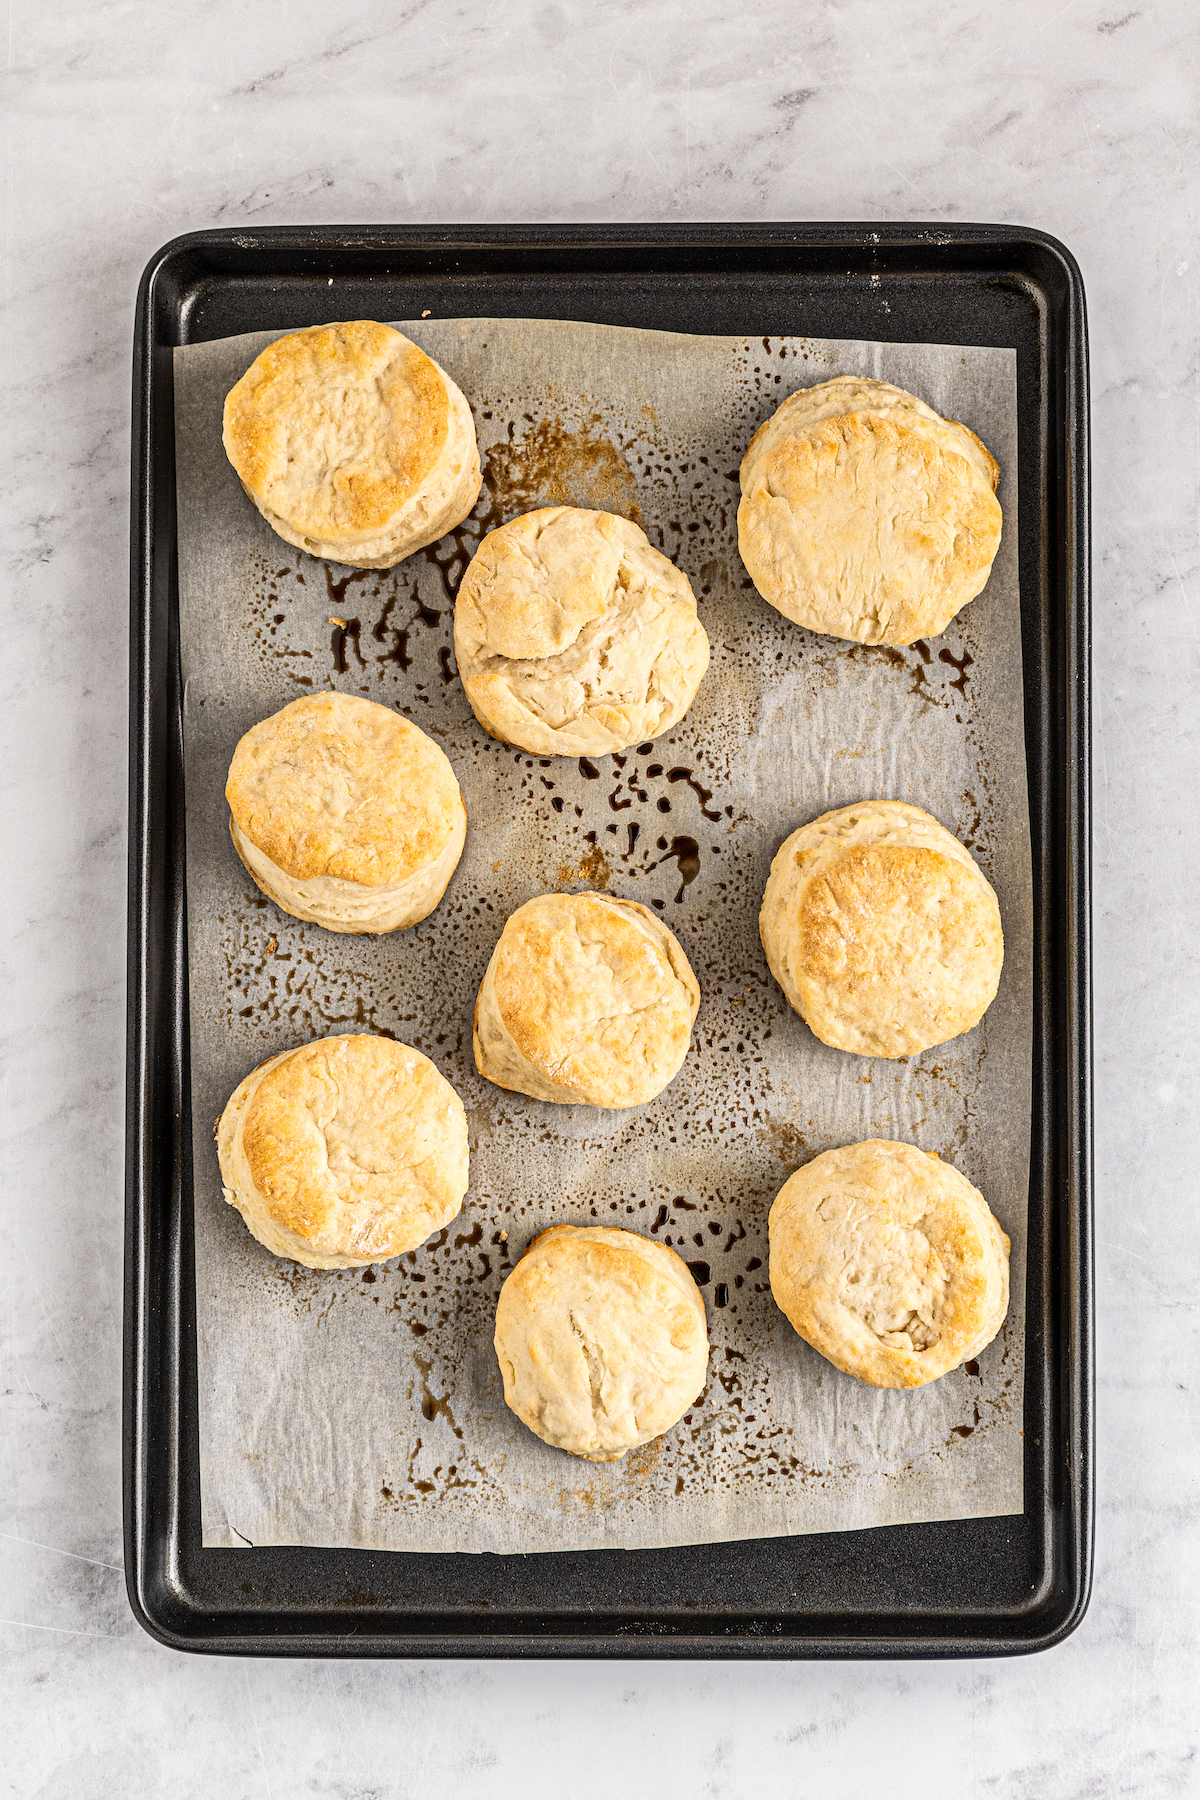 Baked, golden biscuits on a baking sheet.